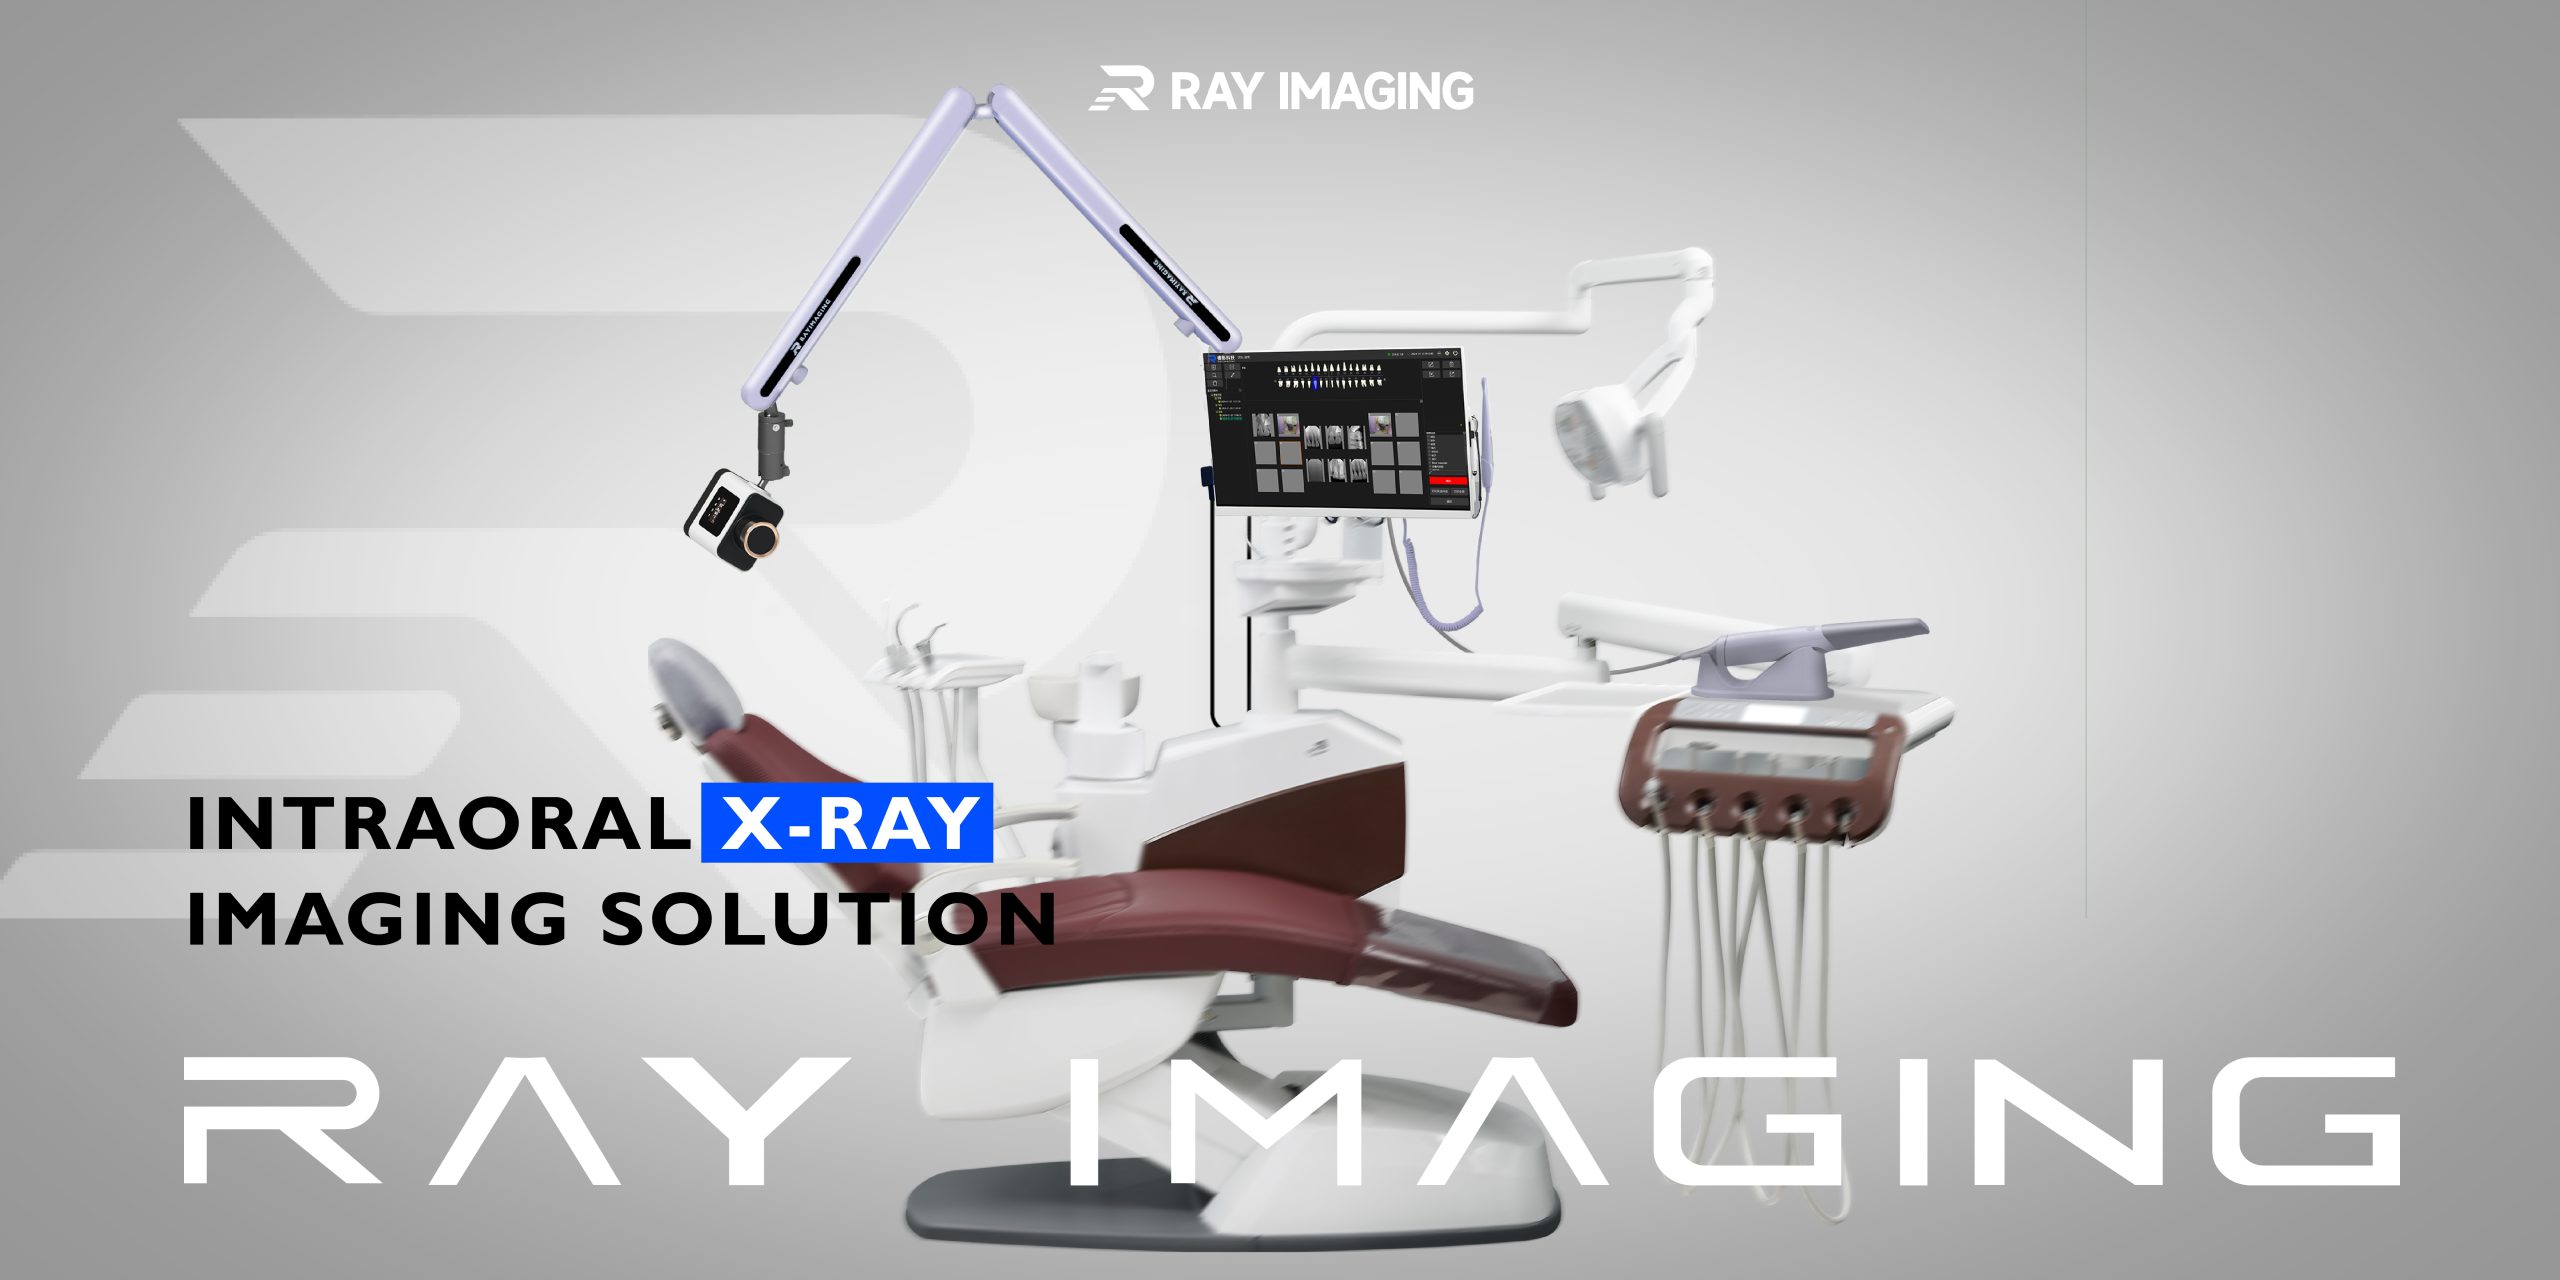 eRay DR X-ray Imaging System